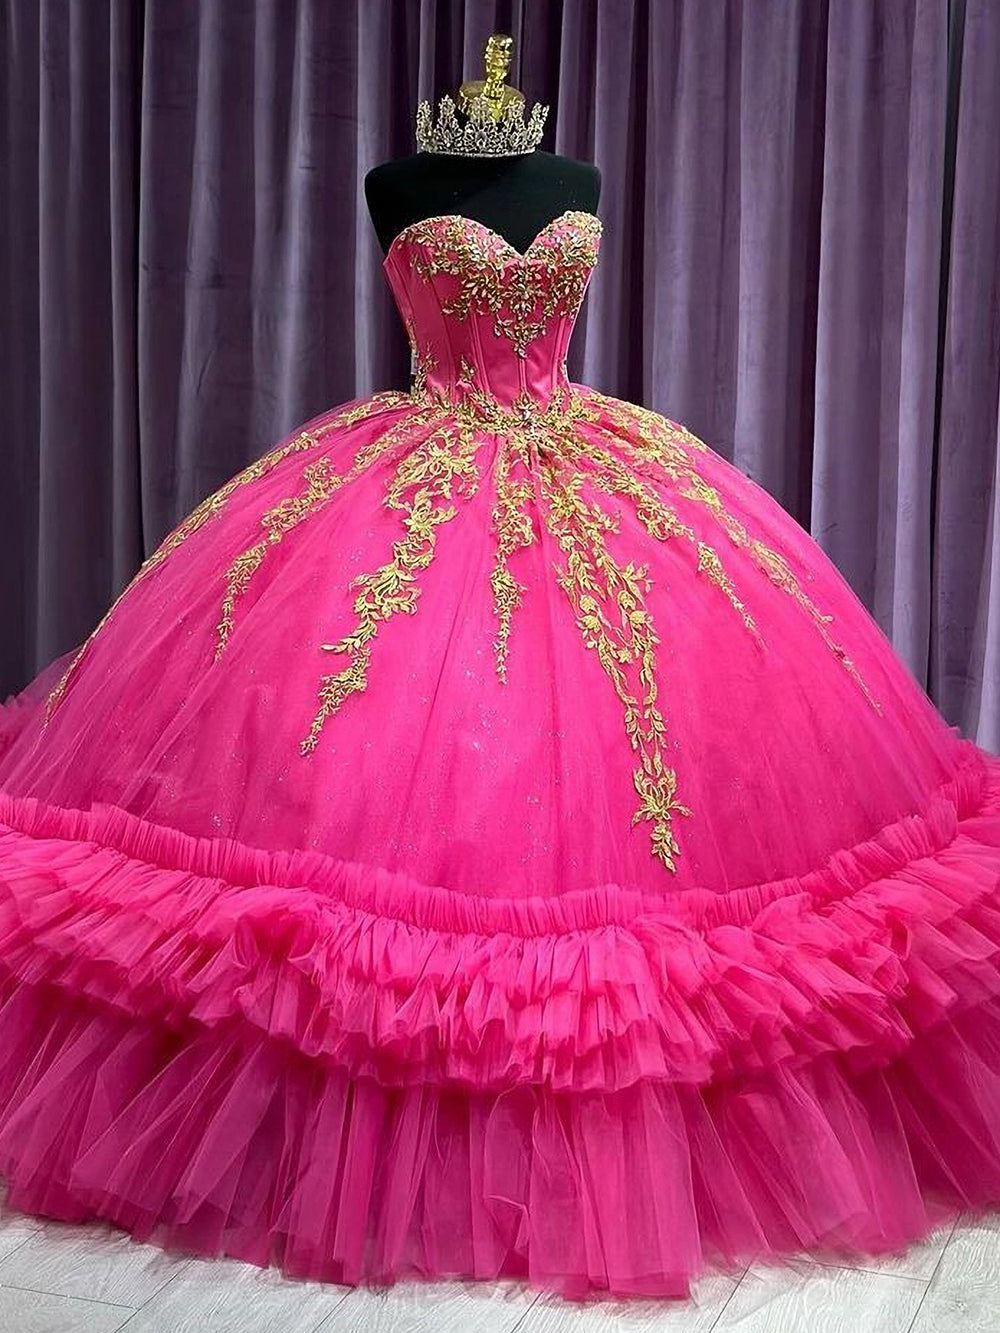 Bright Pink Quinceanera Dresses For Sweet 15 16 Girls Ball Gown Strapless Corset Gold Lace Appliques Tiered Ruffle Beaded Birthday Party Gown